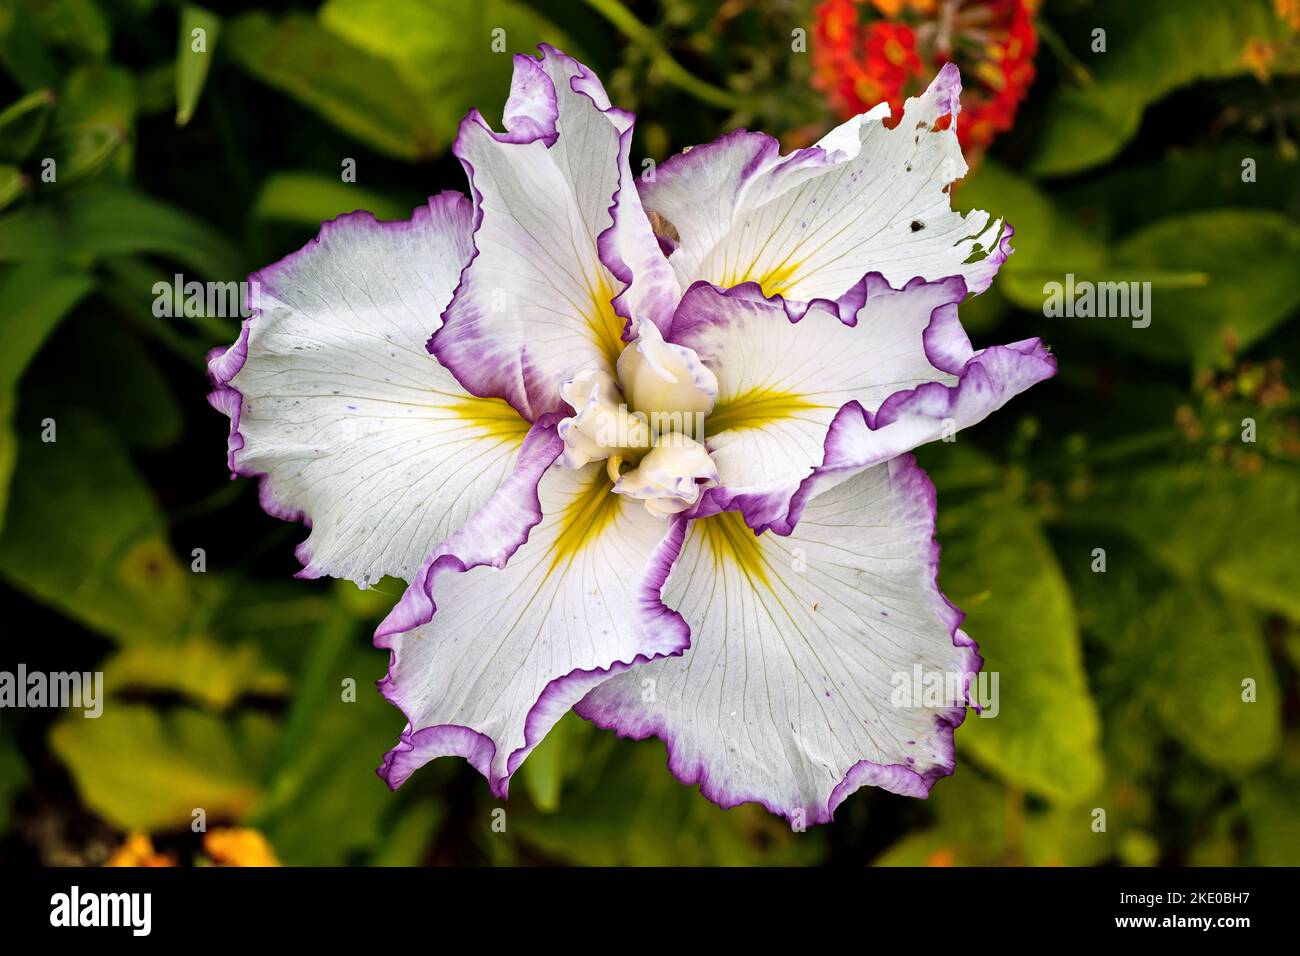 Japanese Water Iris (Iris) flower head with crinkly edges to the petals. Stock Photo